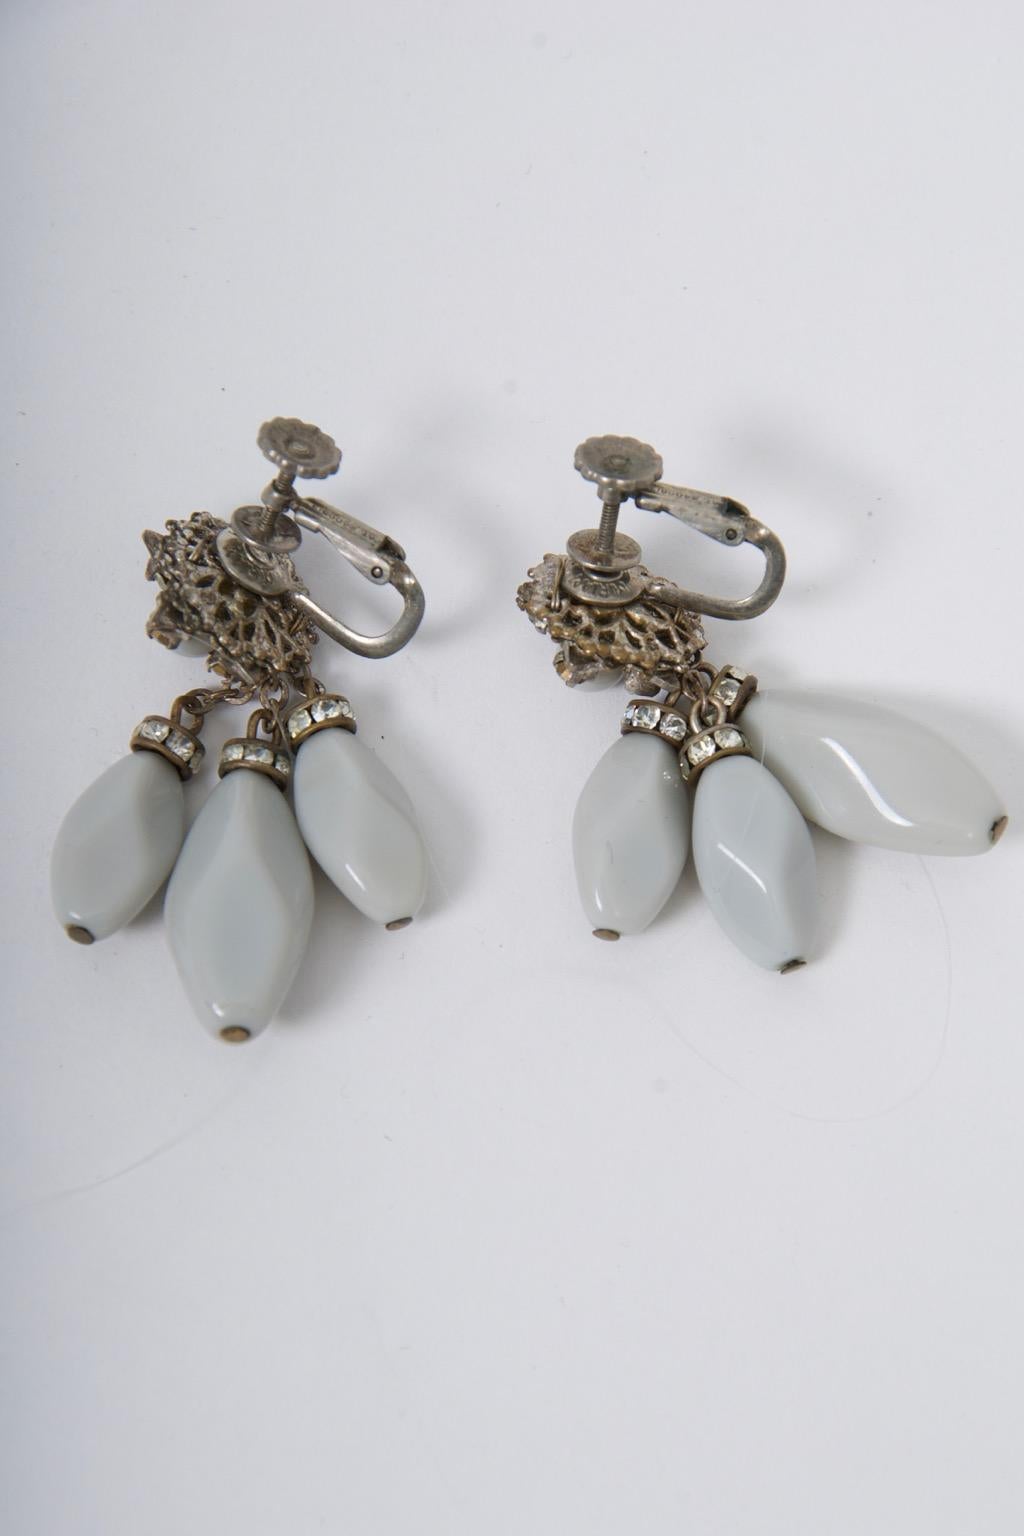 Unusual and sophisticated coloring in these c. 1960 Miriam Haskell earrings, featuring three smoothly faceted gray bead drops below rhinestone rondels, and suspended from a typical pierced Haskell earpiece centering a round gray bead. Clip-on